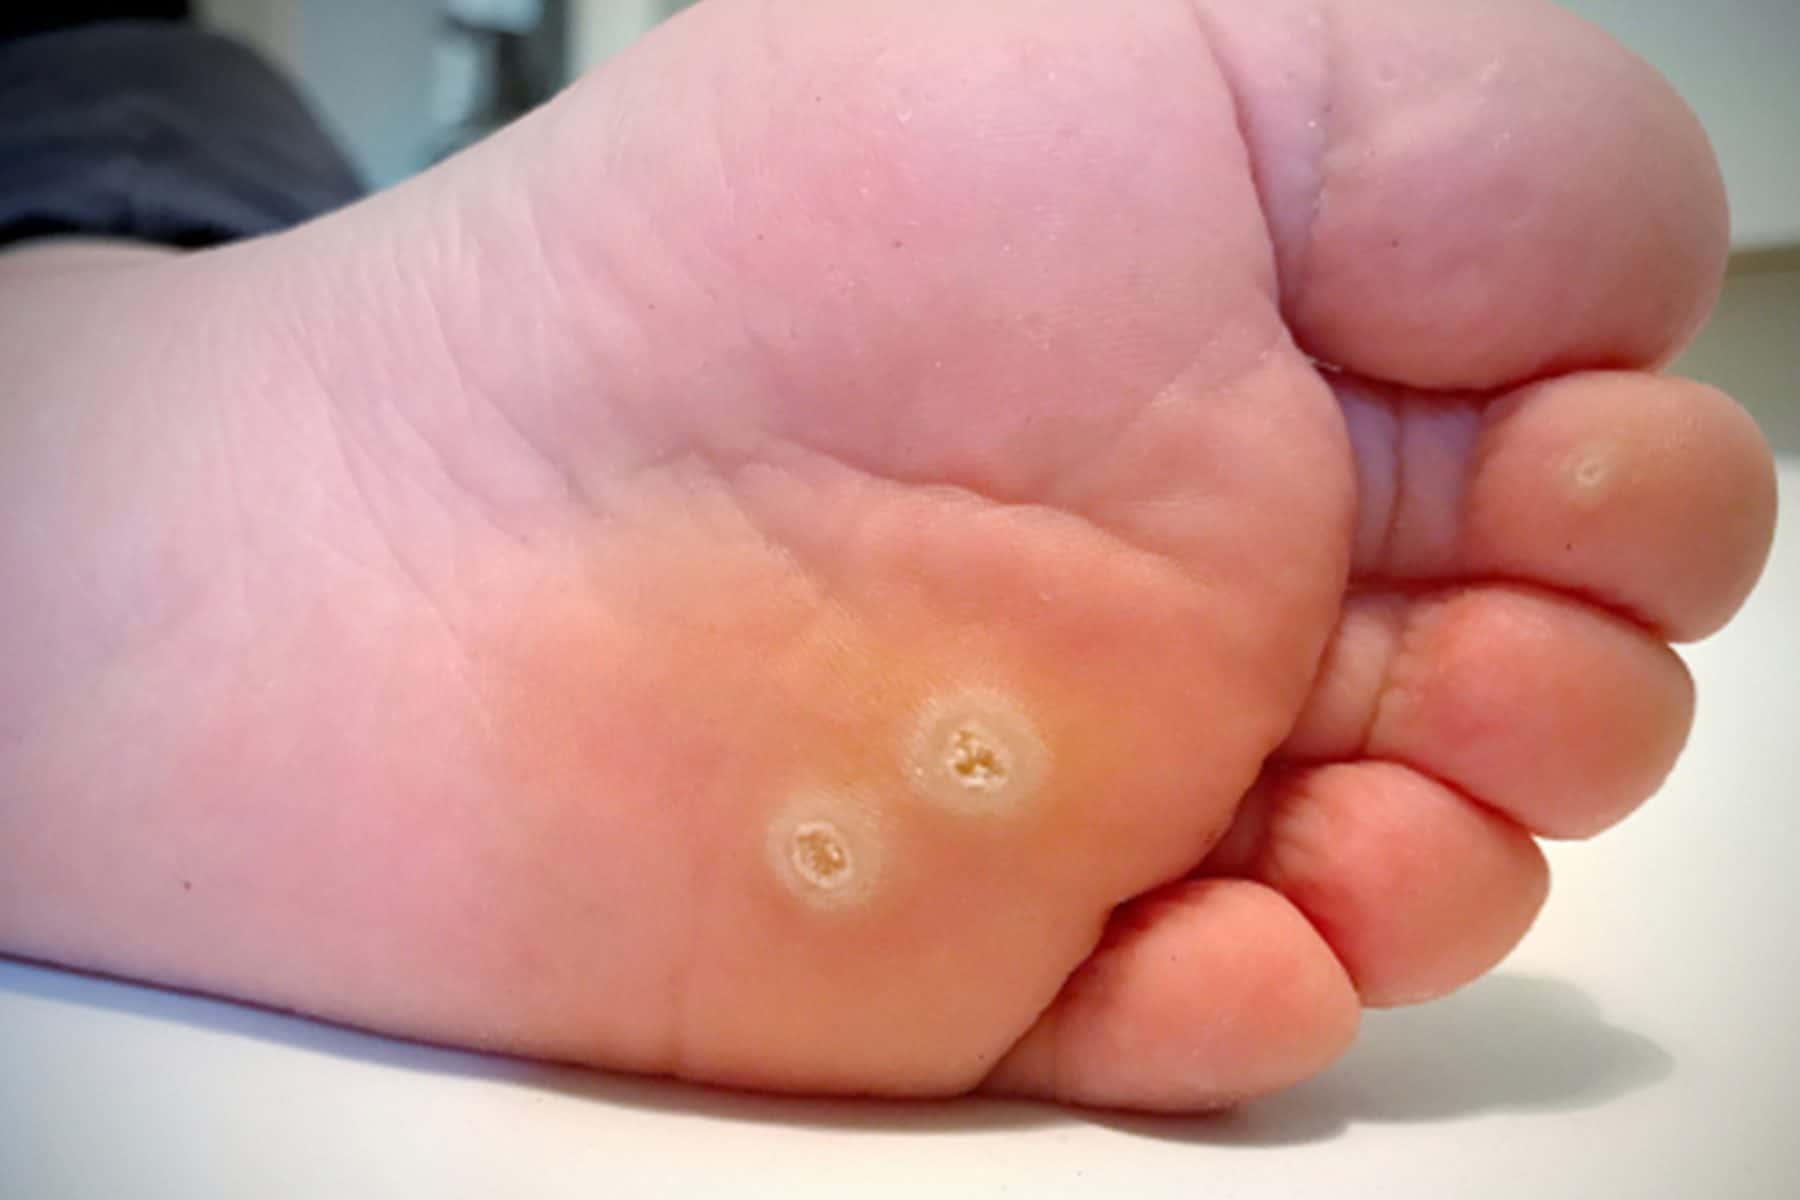 warts on your foot